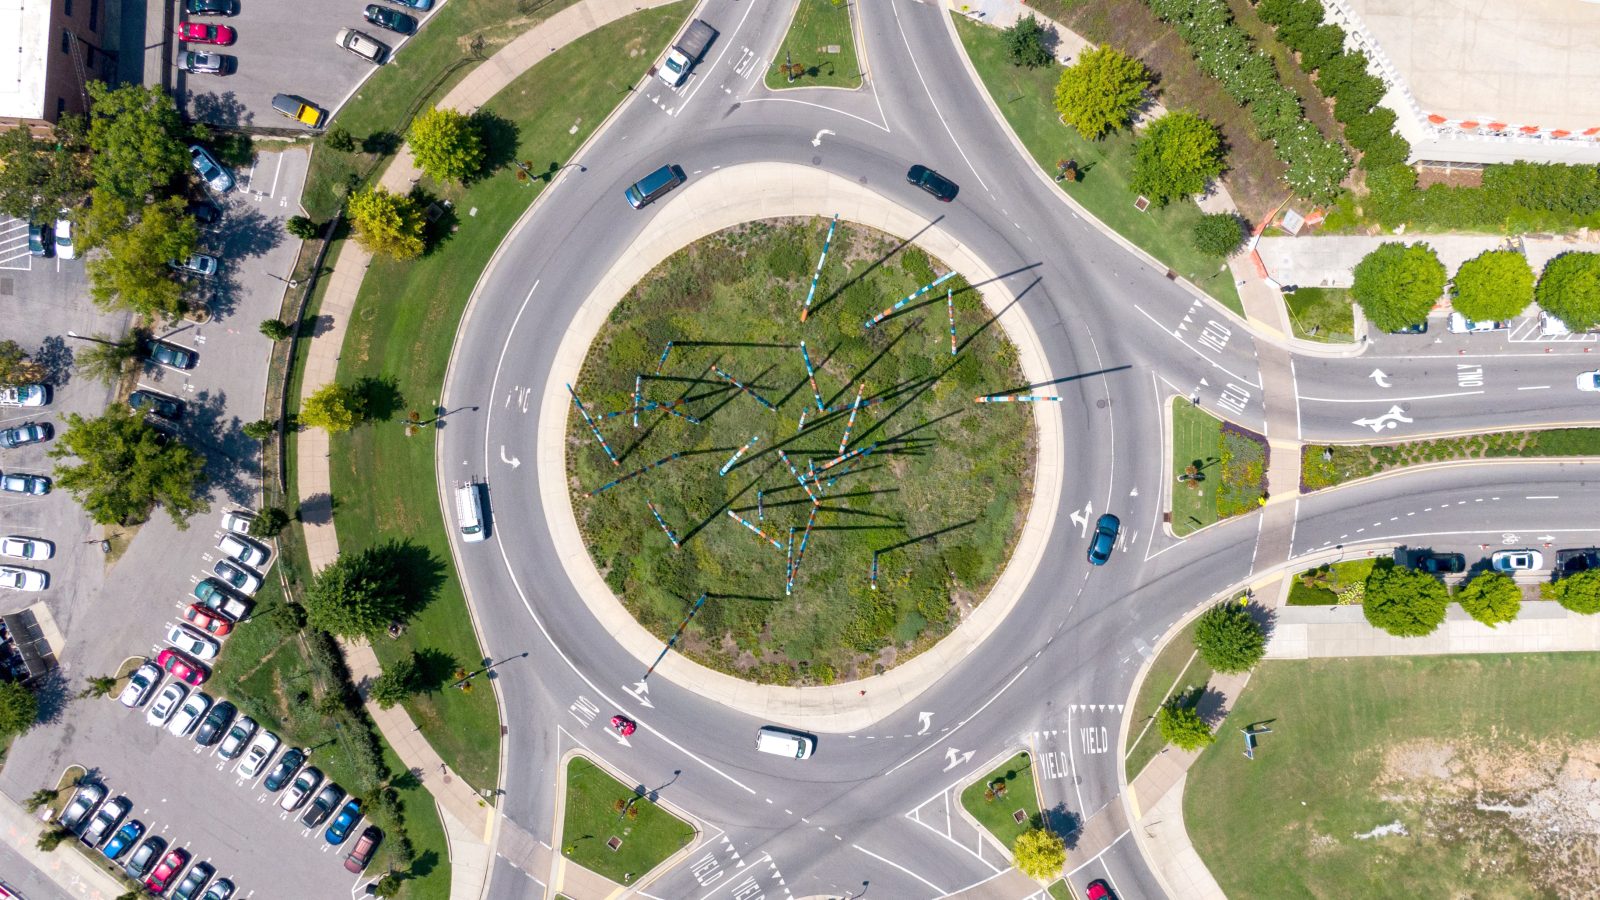 UCPR roundabout policy and plans review